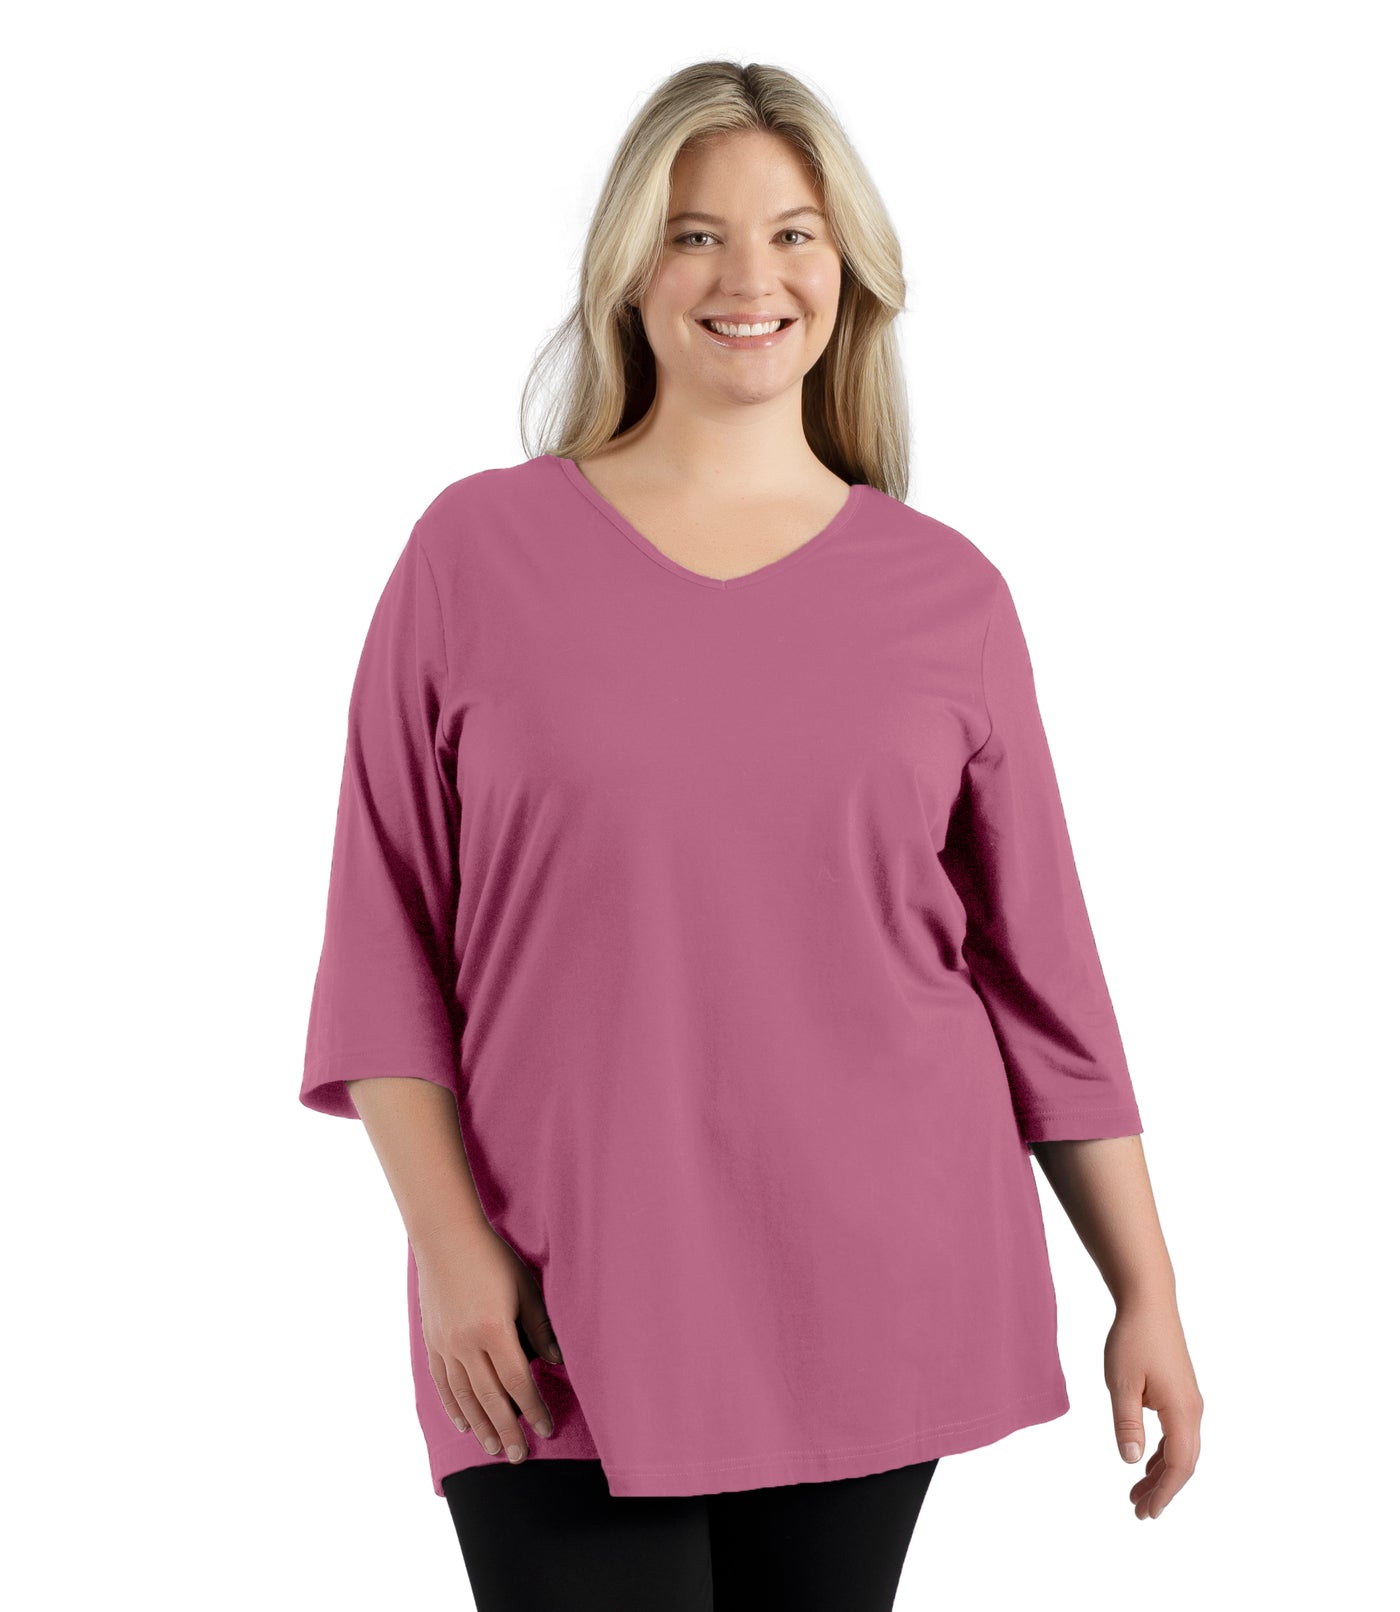 Plus size woman, facing front, wearing JunoActive’s Stretch Naturals Lite 3/4 Sleeve V-neck Tunic, color mulberry. Arms by side.